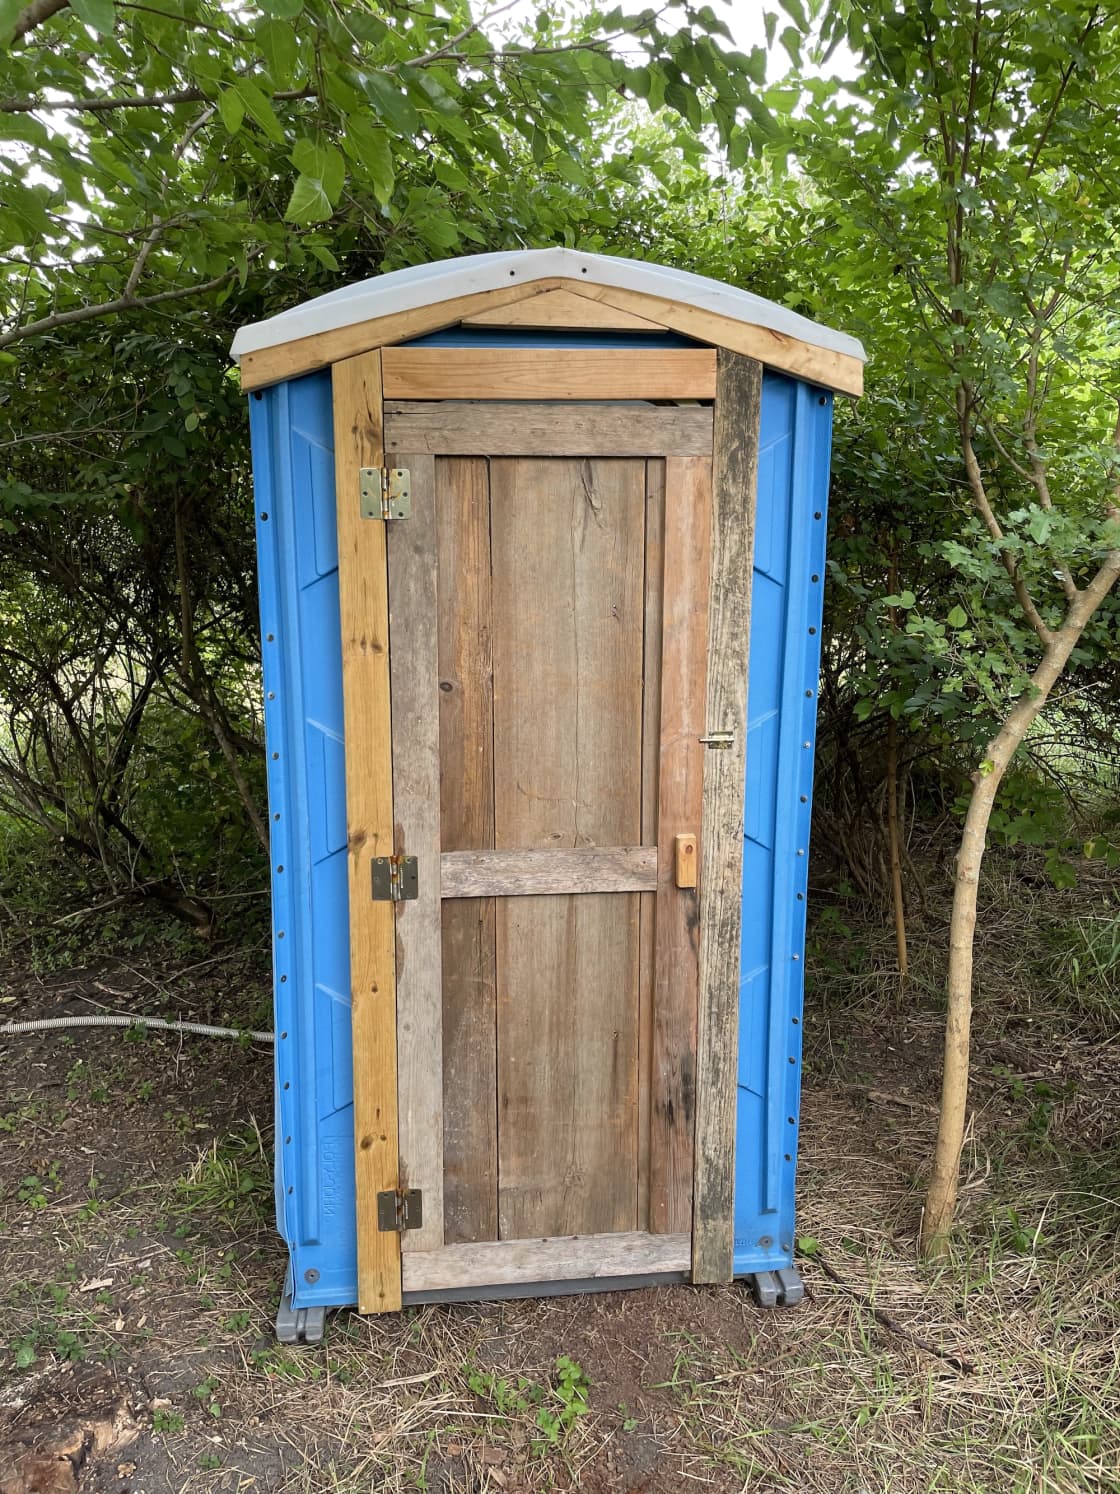 A short walk from the site is a composting outhouse